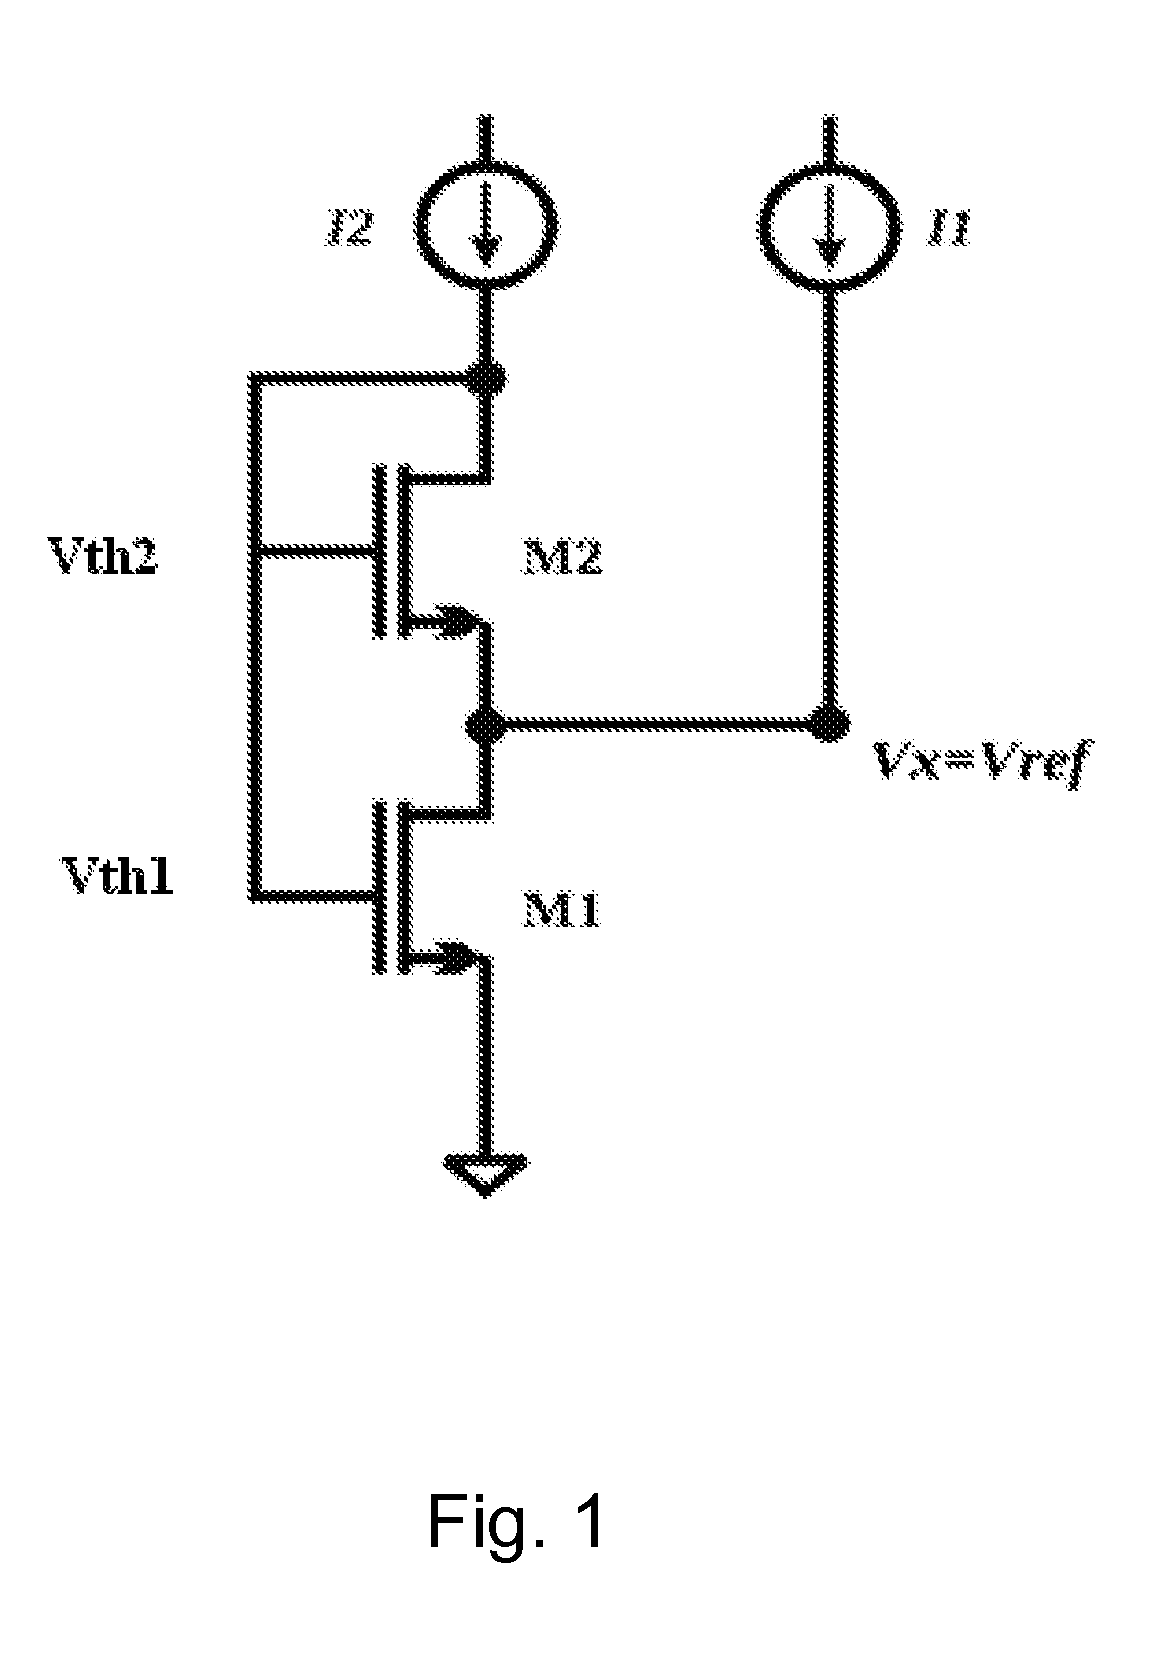 Temperature-Compensated Reference Voltage System With Very Low Power Consumption Based On An SCM Structure With Transistors Of Different Threshold Voltages